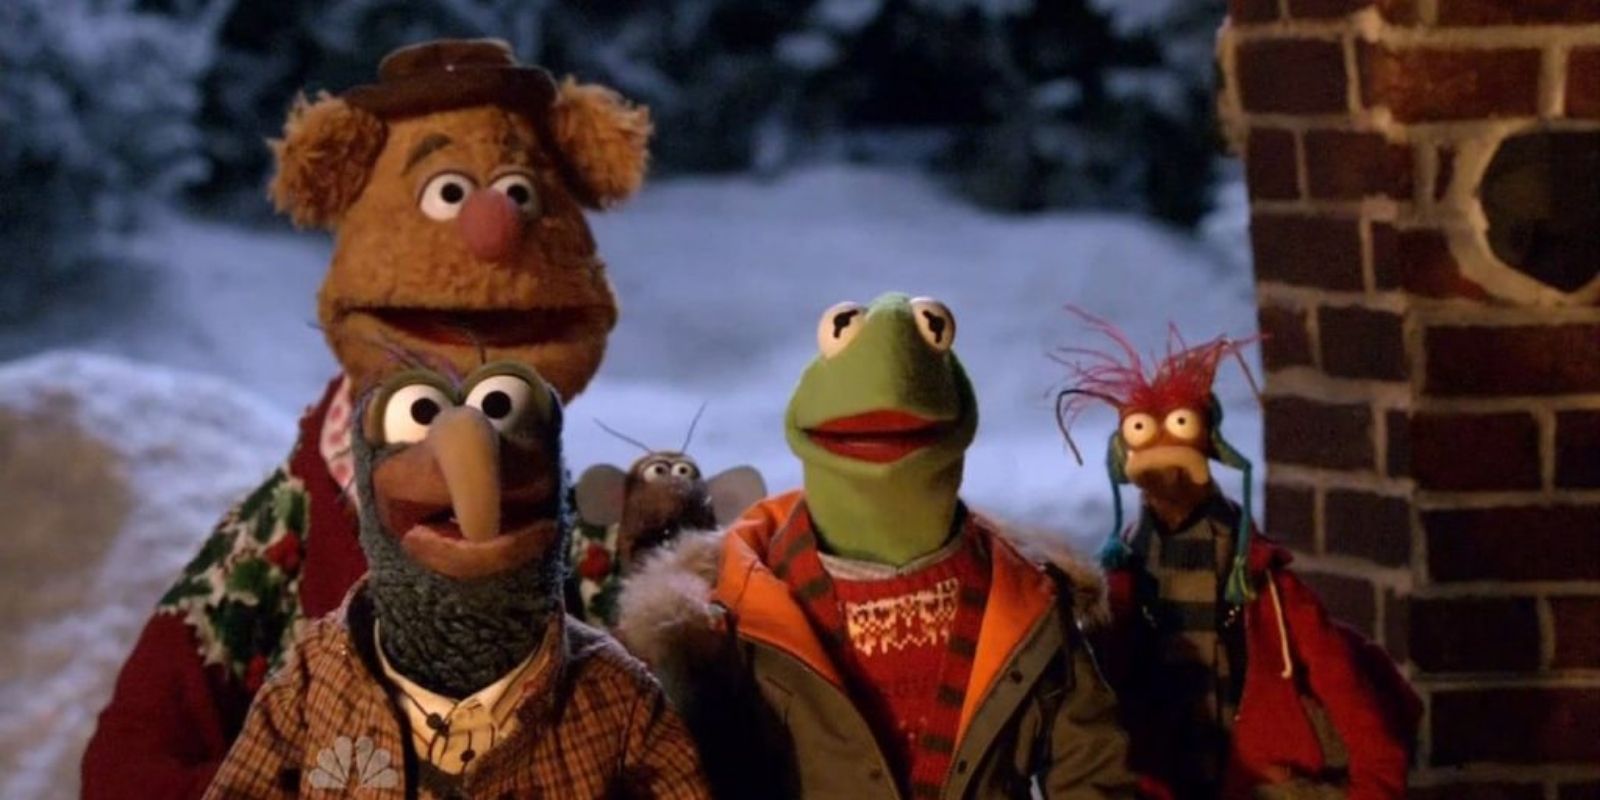 Fozzie Bear Gonzo the Great Rizzo the Rat Kermit the Frog and Pepe the King Prawn The Muppets